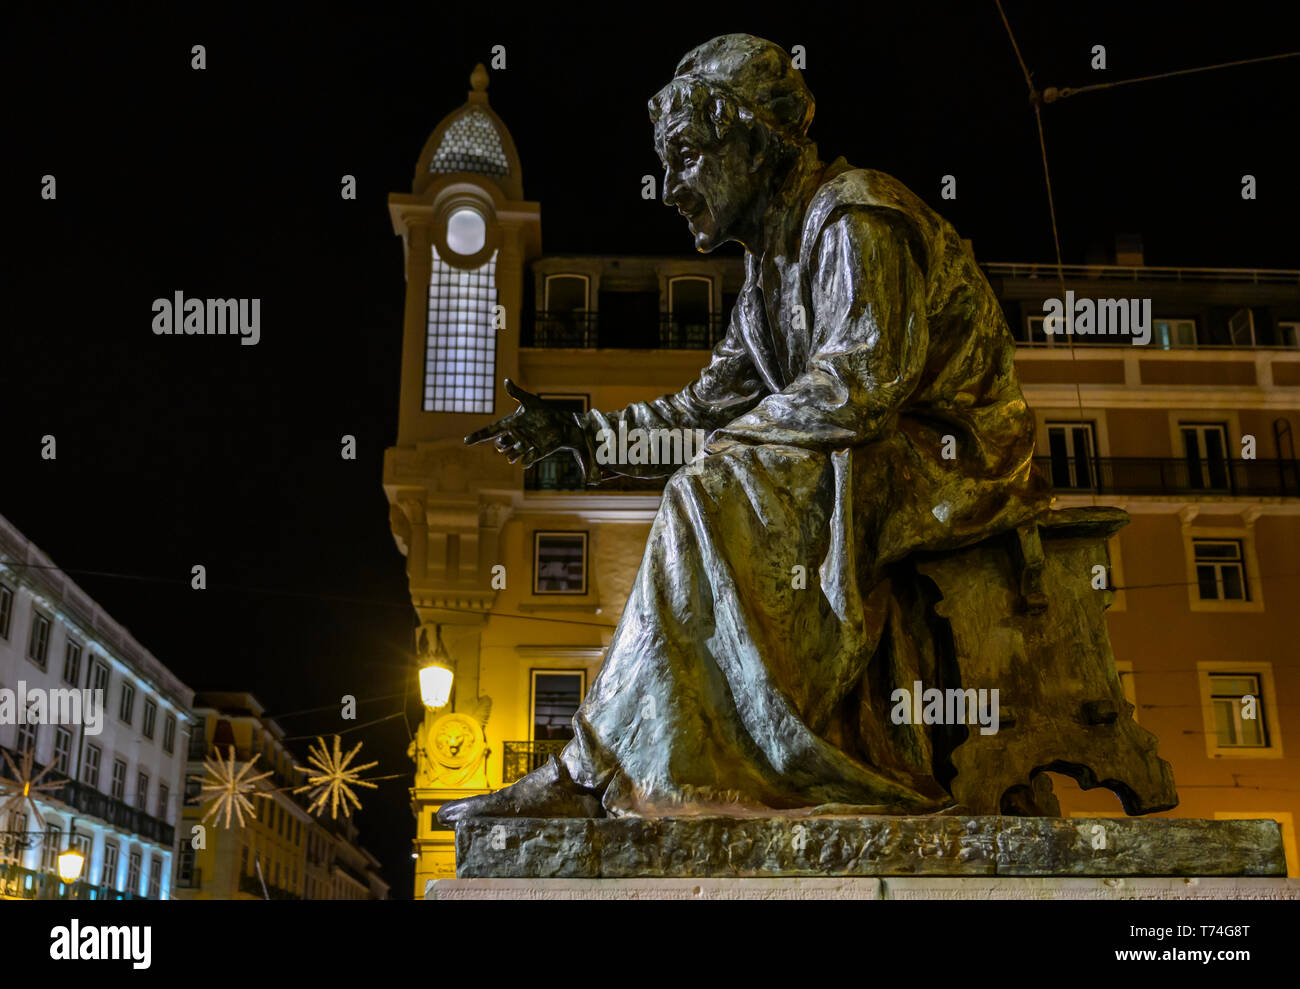 Statue of a man sitting in a town square at night; Lisbon, Lisboa Region, Portugal Stock Photo